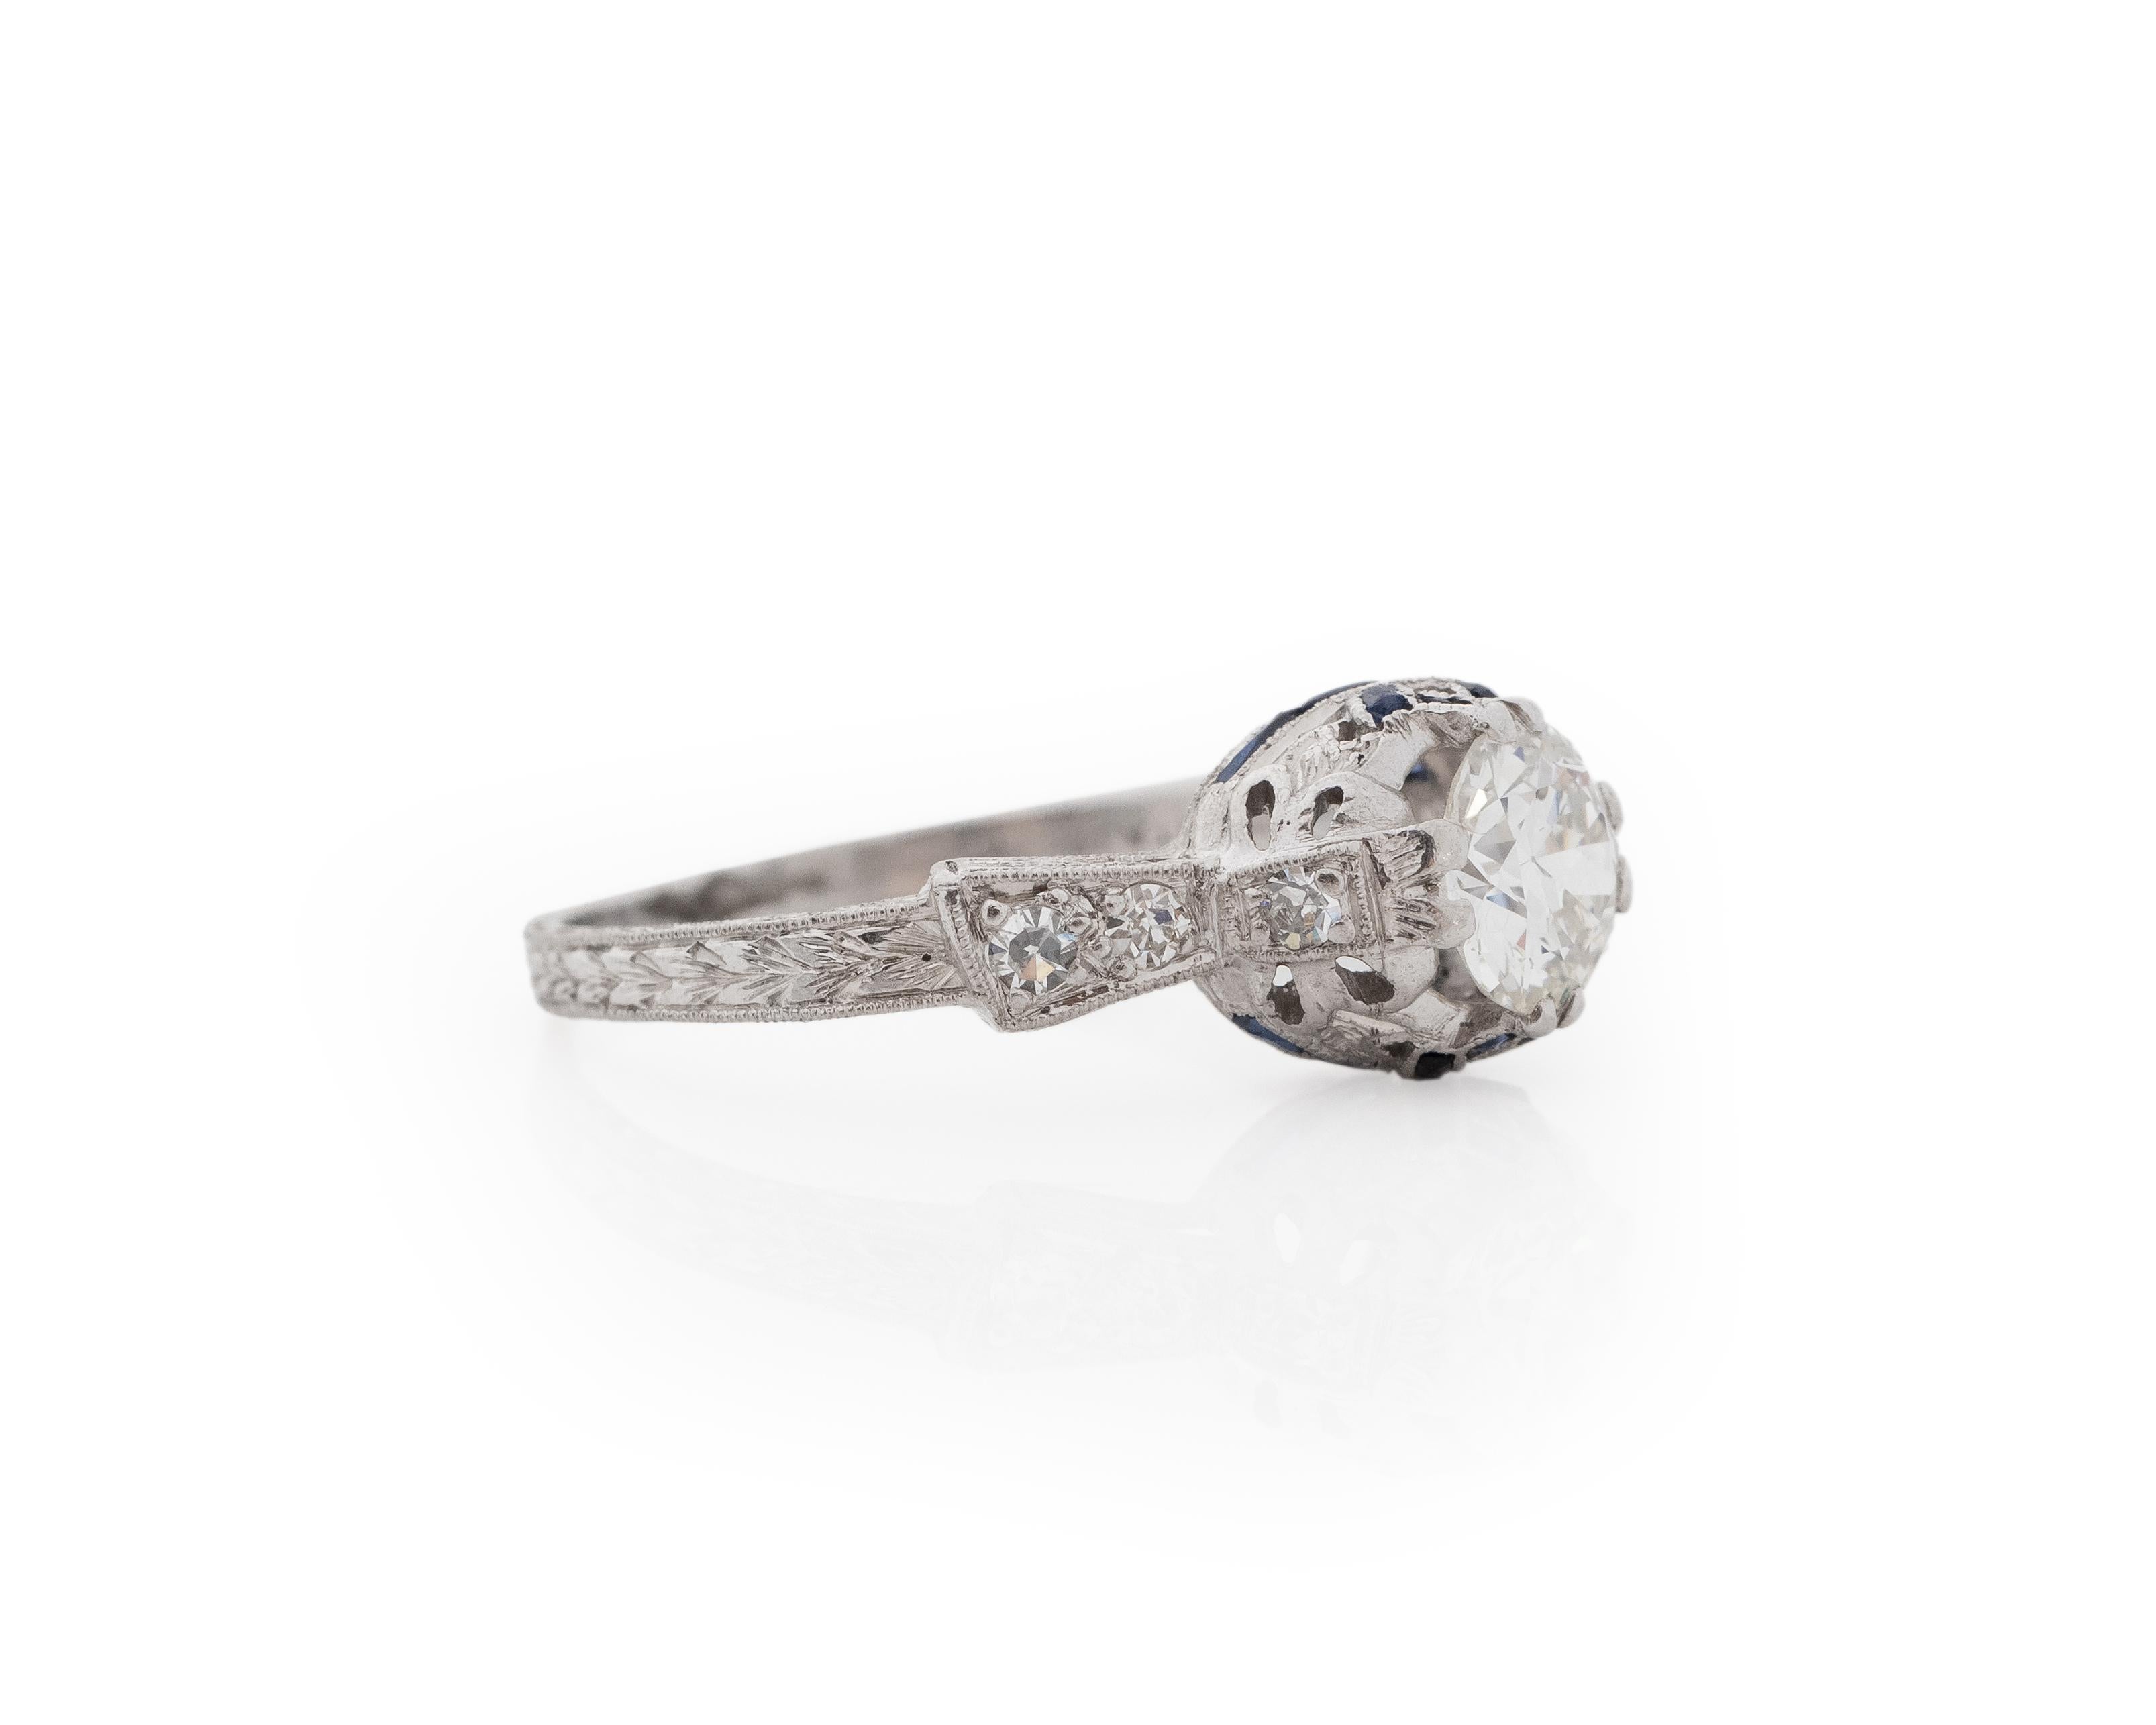 Year: 1920s

Item Details:
Ring Size: 7.25
Metal Type: Platinum [Hallmarked, and Tested]
Weight: 3.7 grams

Center Diamond Details:
Weight: .95ct total weight
Cut: Old European brilliant
Color: G
Clarity: VS
Type: Natural

Side Diamond Details: